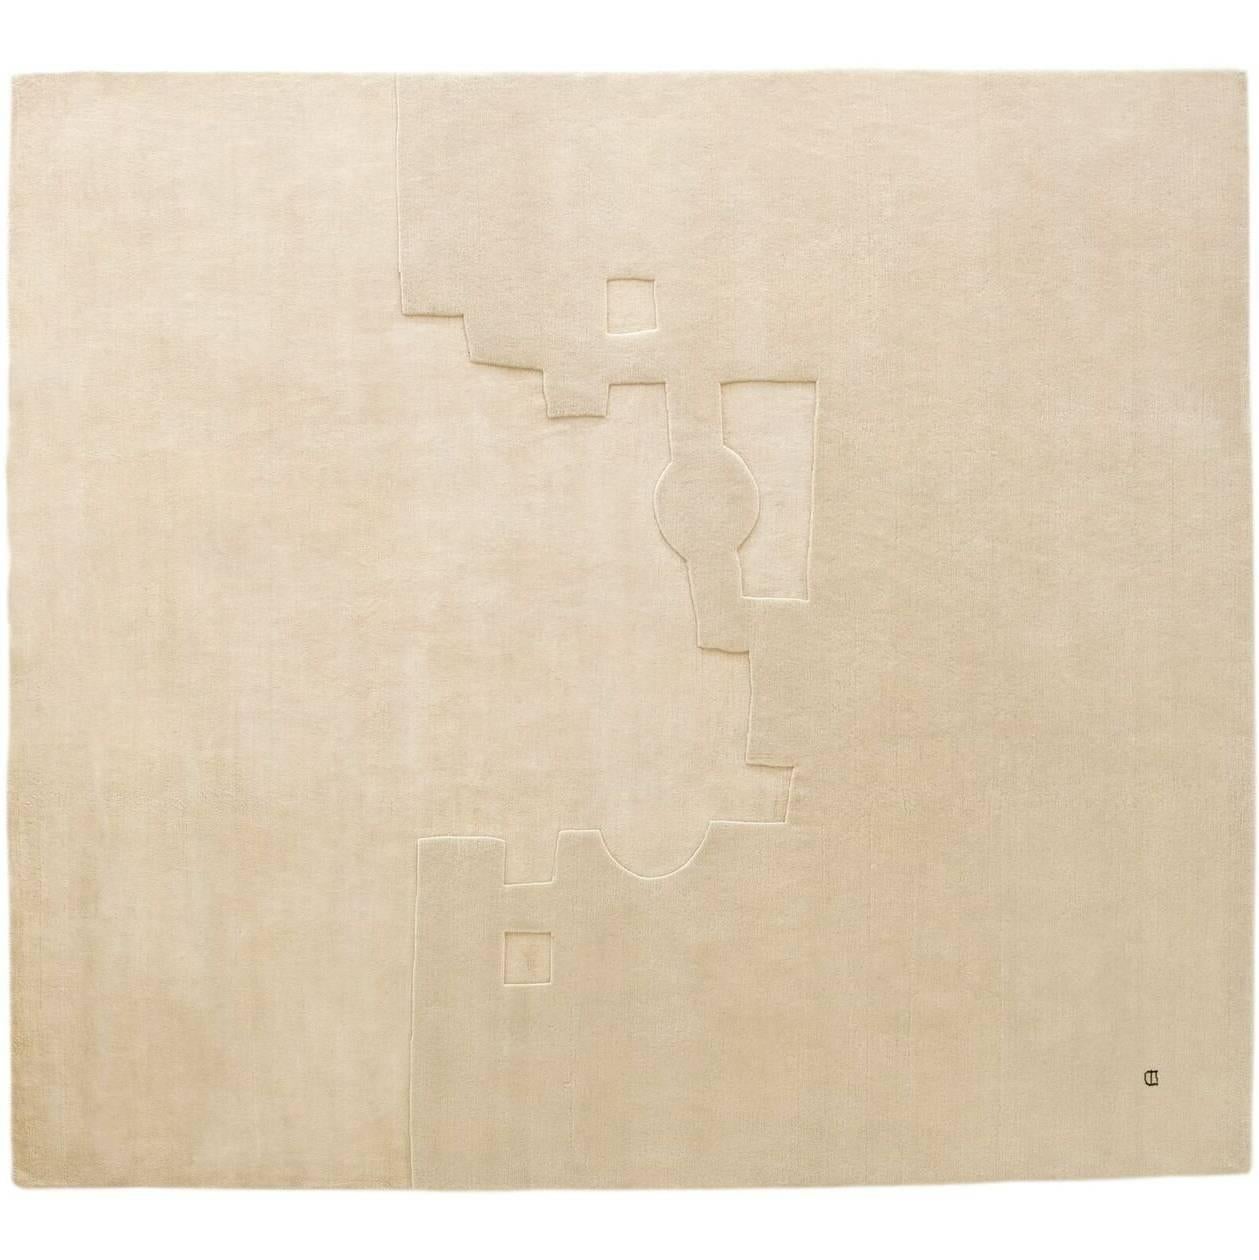 Gravitacion 1994 Hand-Knotted Wool and Silk Area Rug by Eduardo Chillida